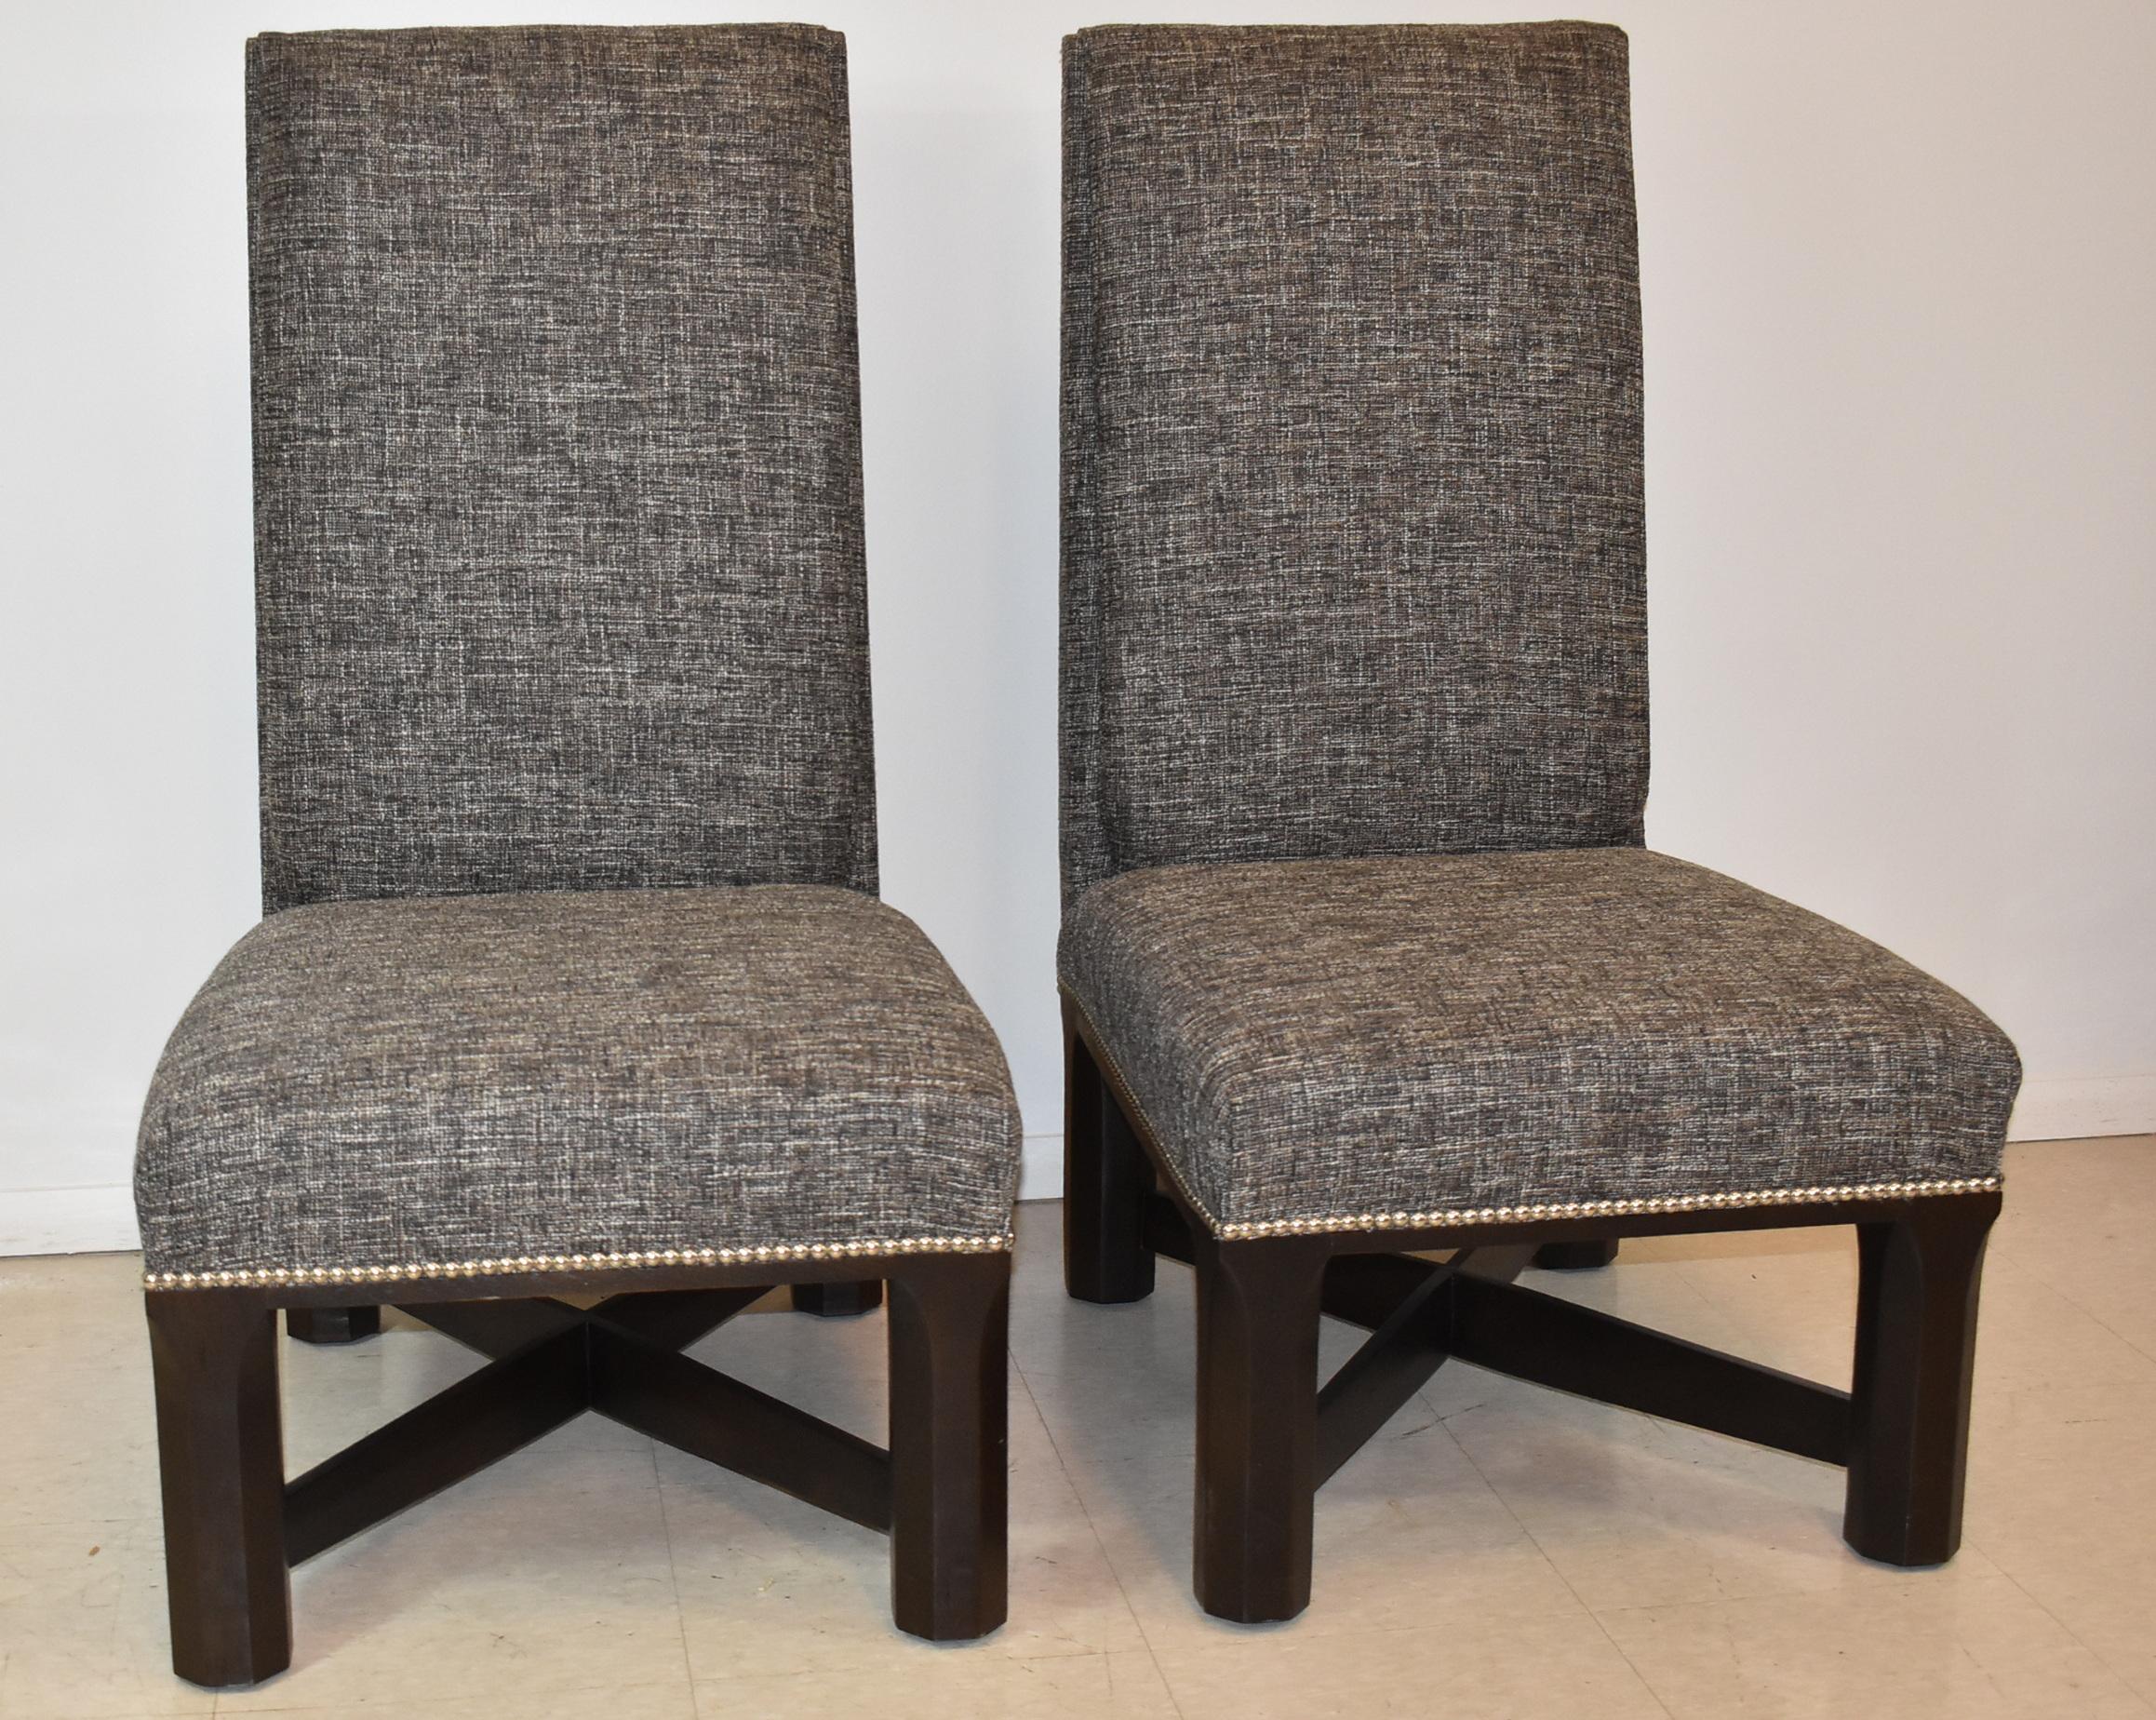 Pair of Century Furniture Parson side chairs. Tweed upholstery in shades of cream , charcoal and tan. Decorative nailhead border. Legs and stretcher bars in espresso finish. Very nice to excellent condition. Dimensions: 28